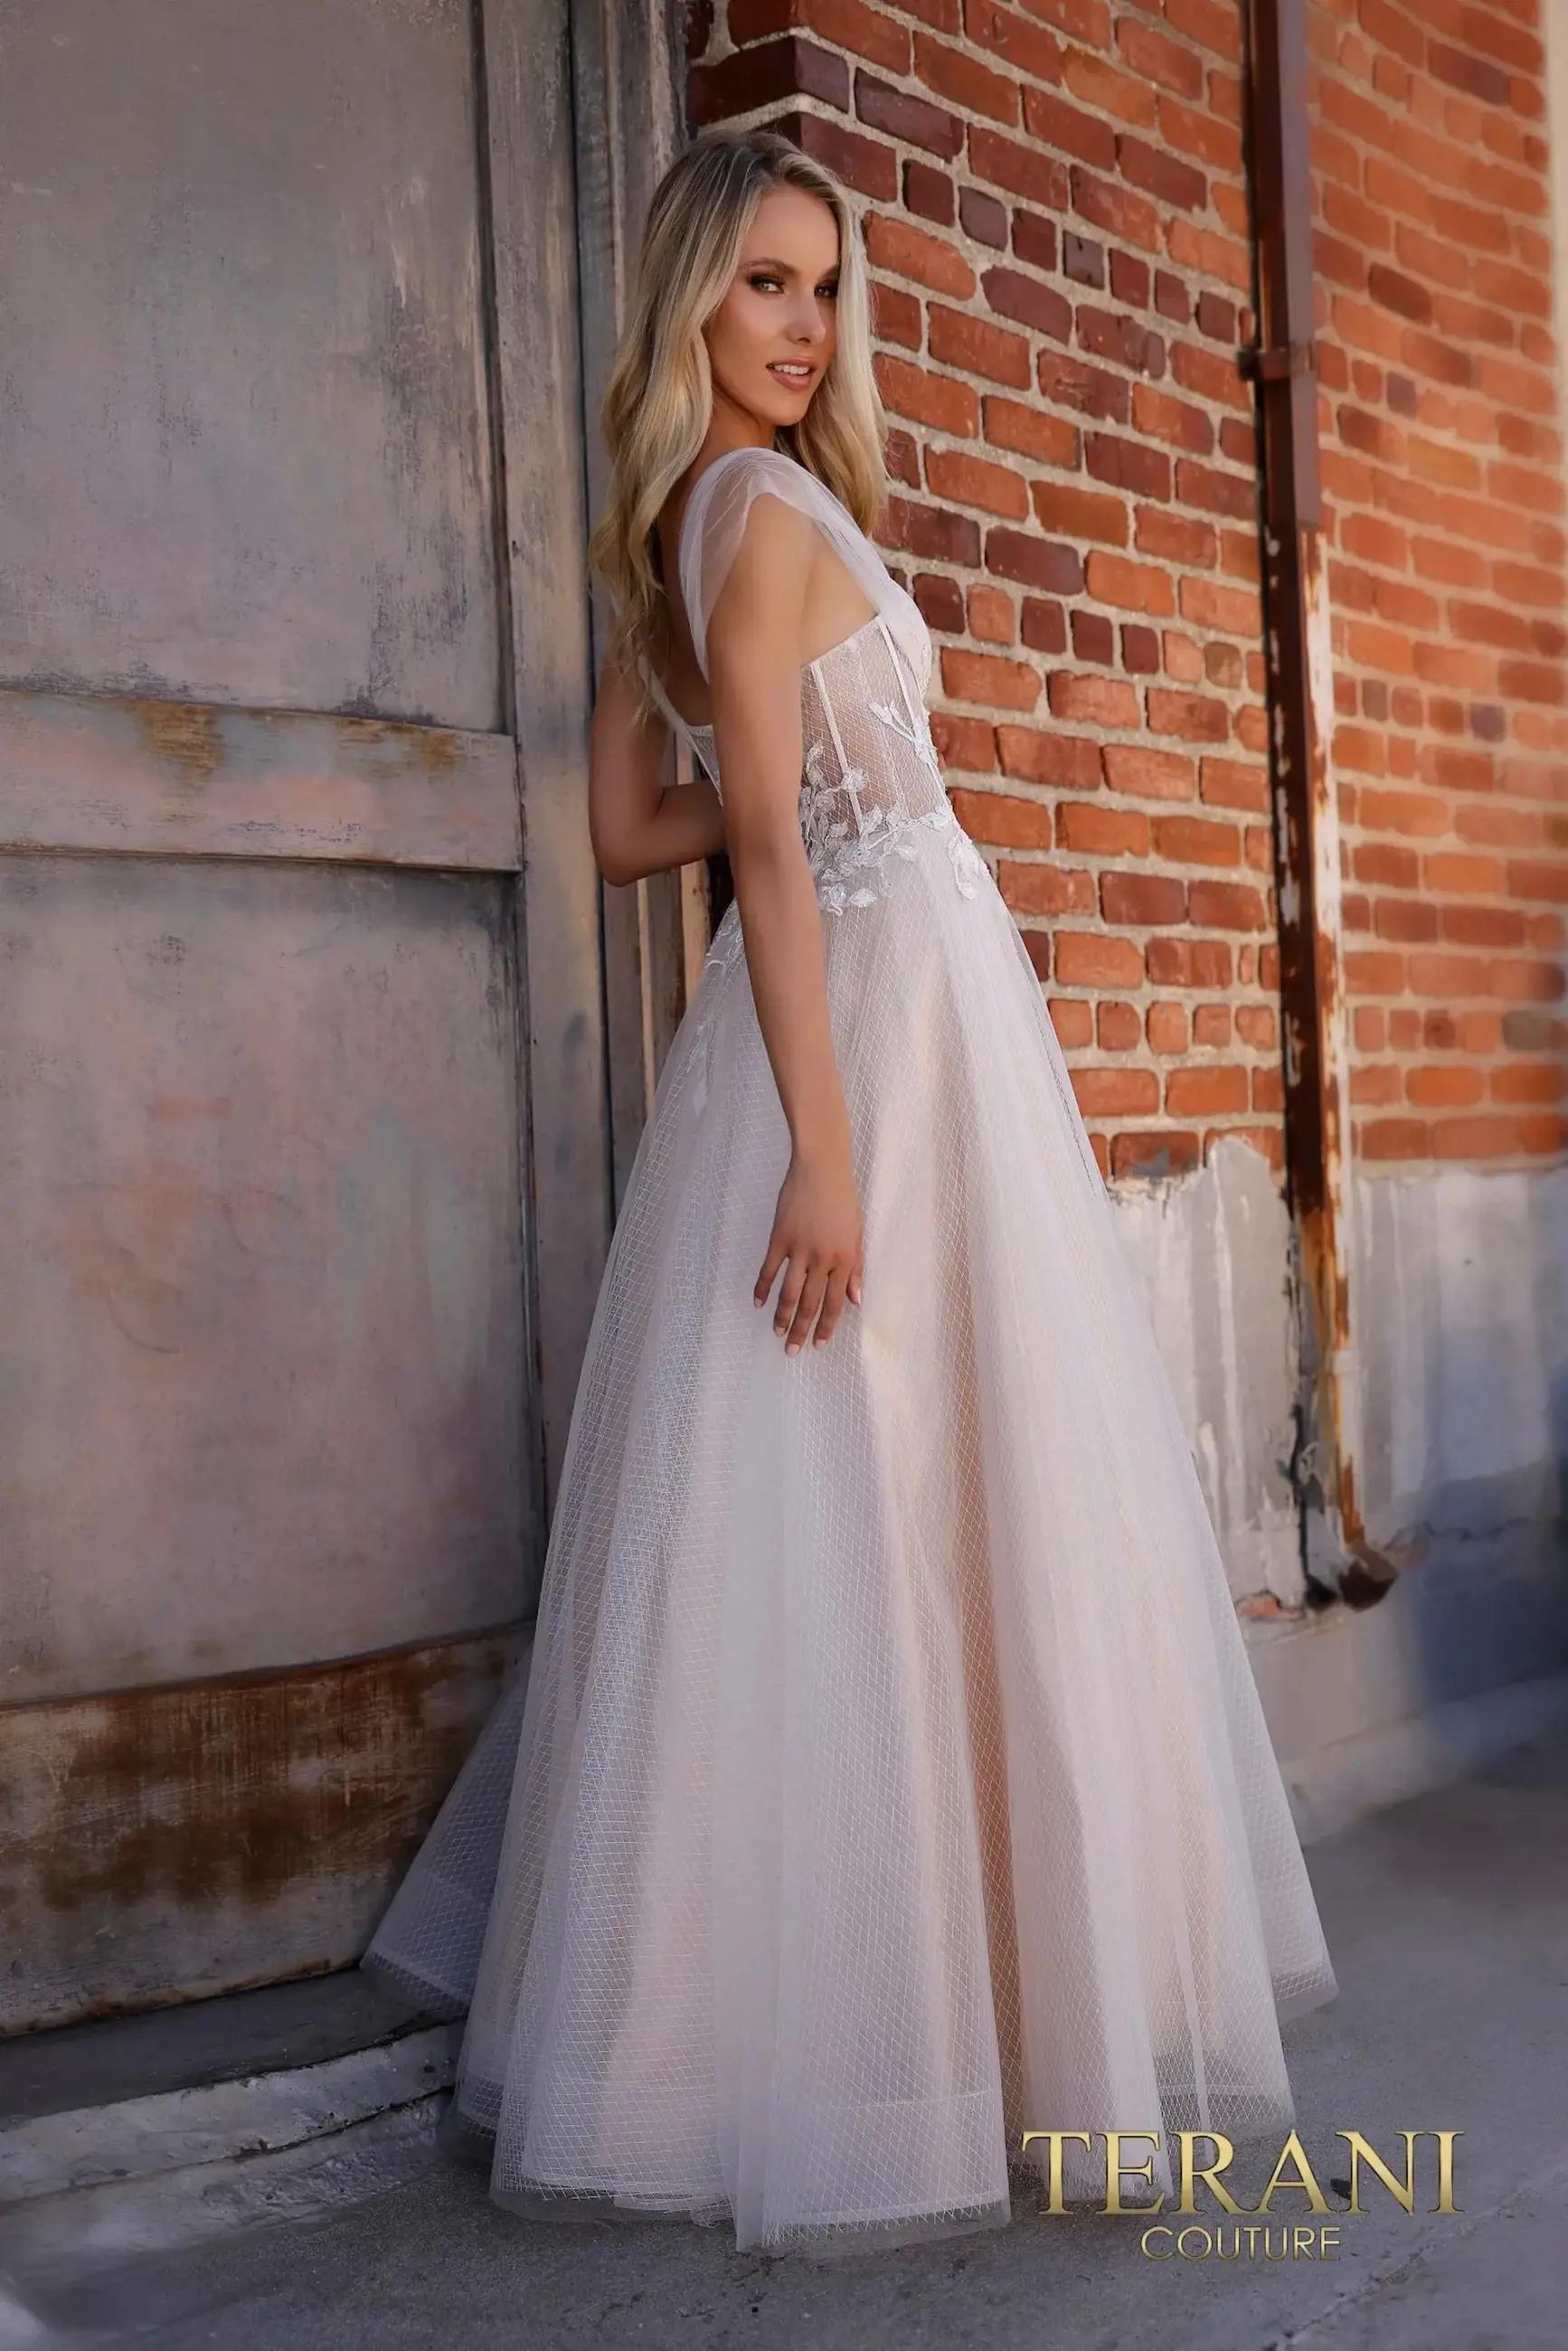 Model in tulle dress next to brick wall